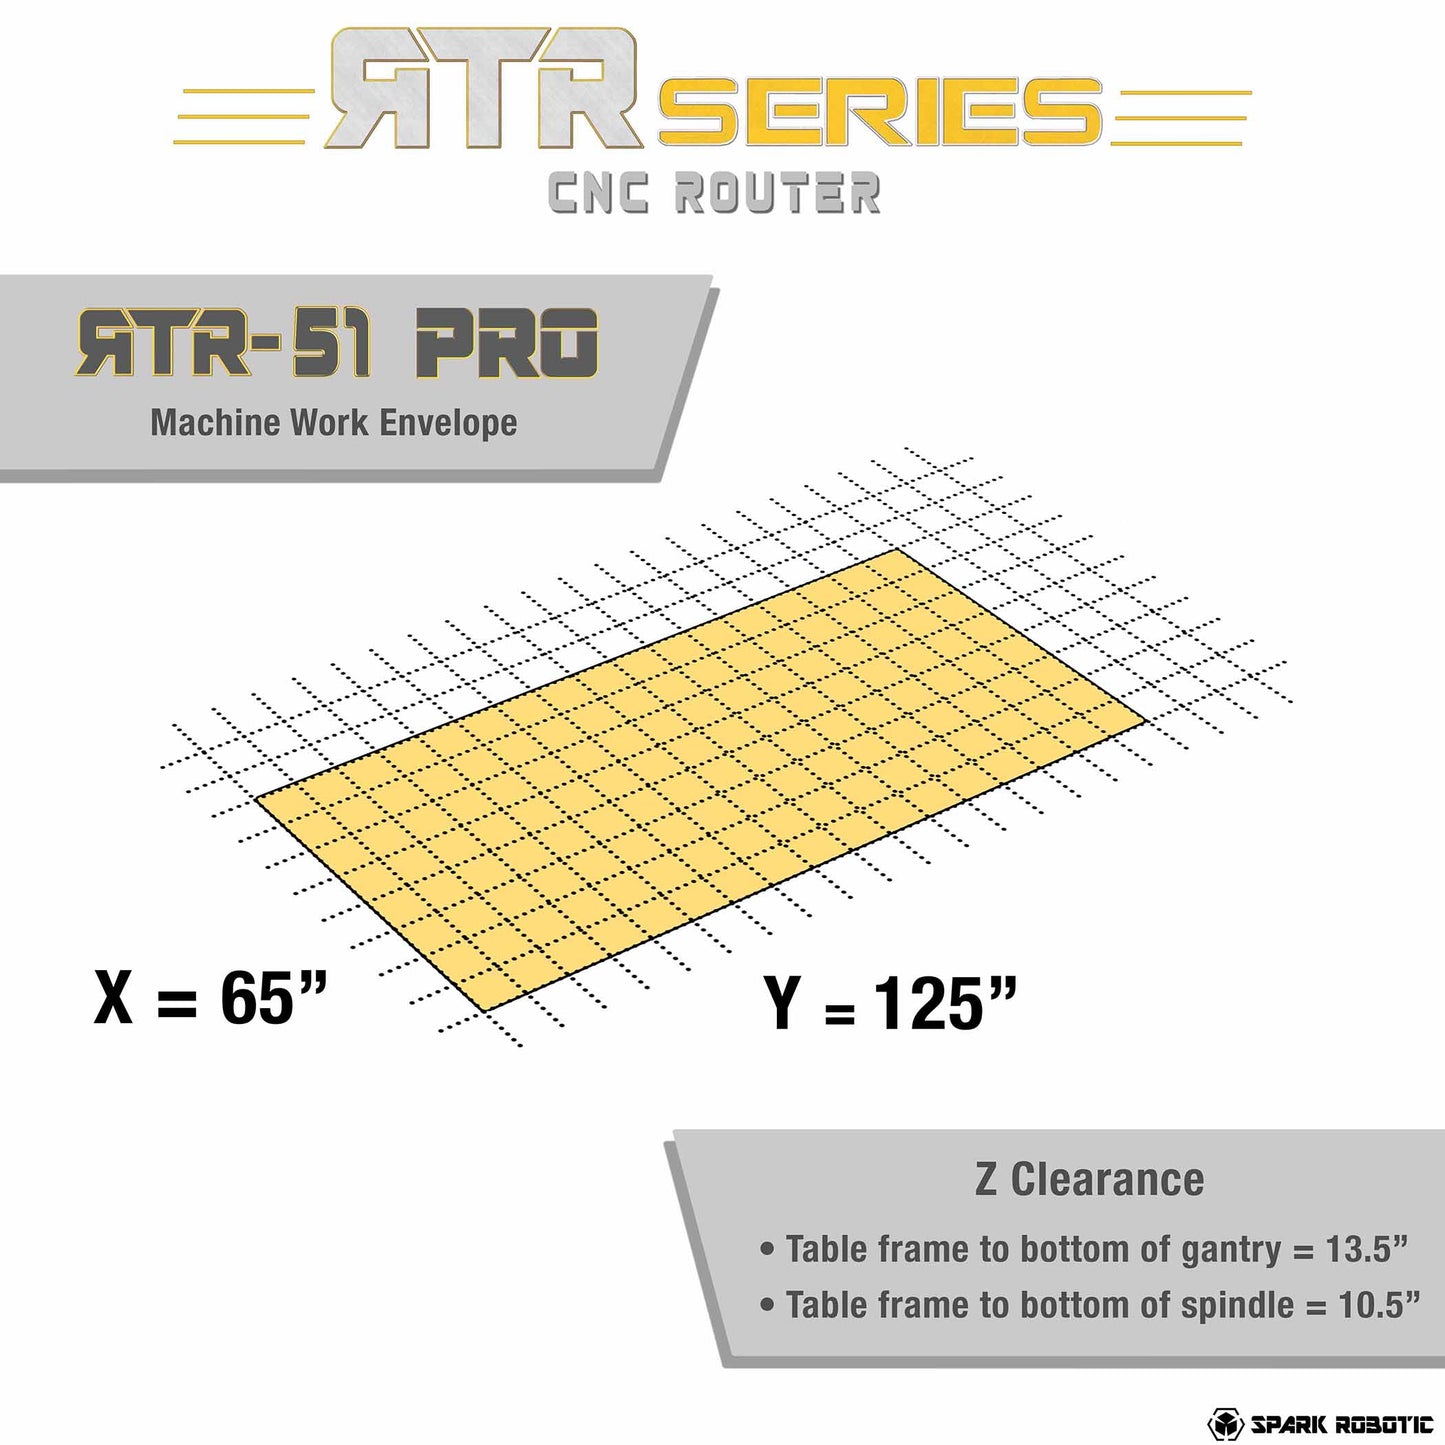 RTR PRO Router